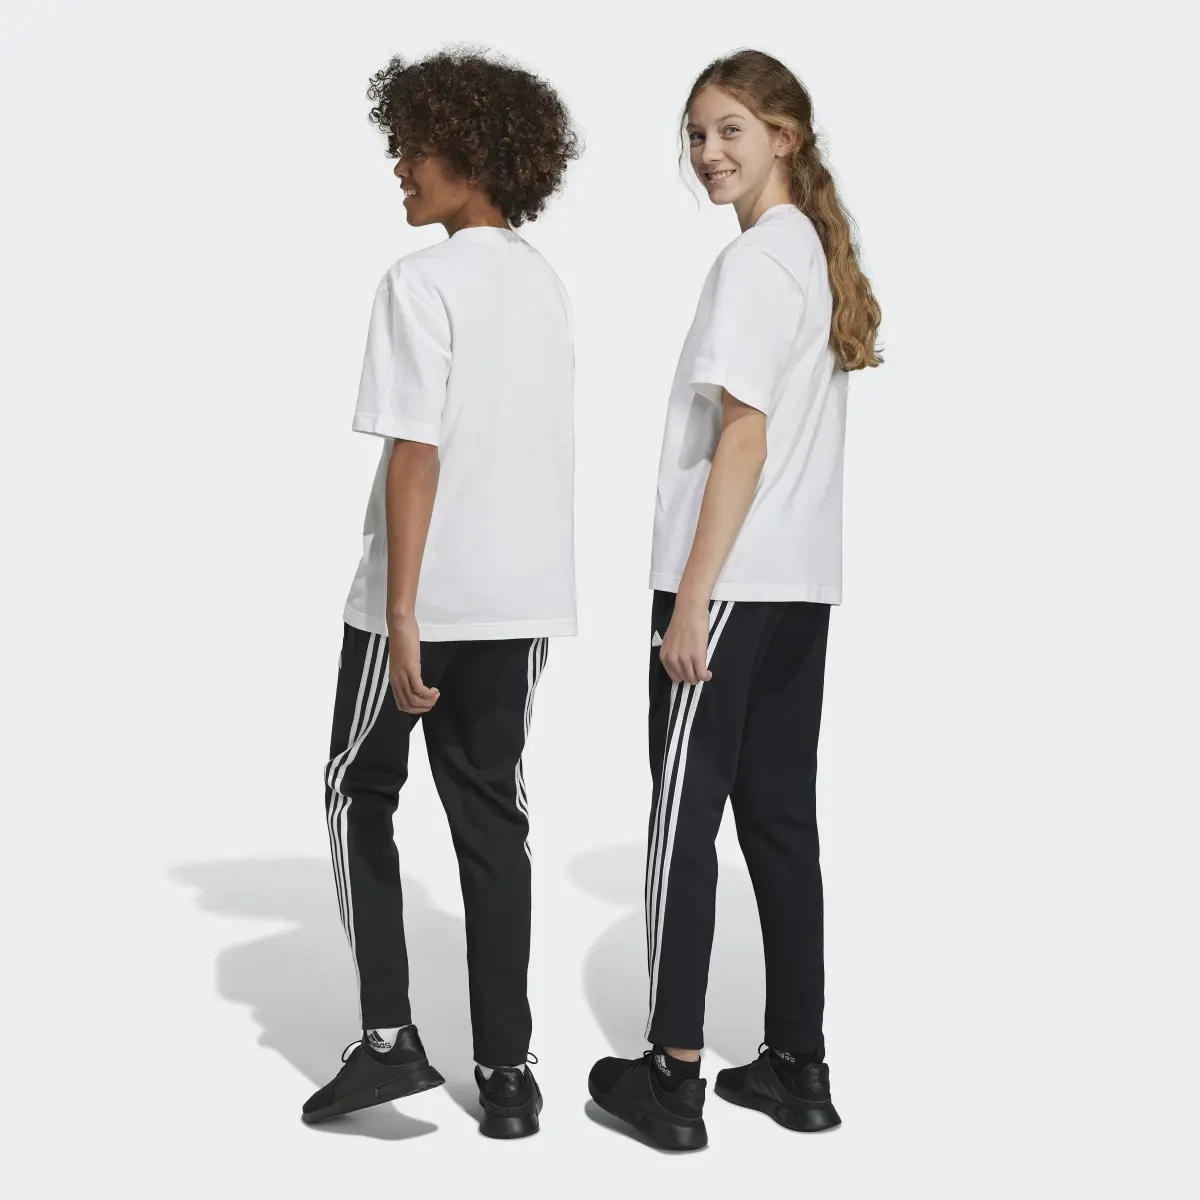 Adidas Future Icons 3-Stripes Ankle-Length Tracksuit Bottoms. 2